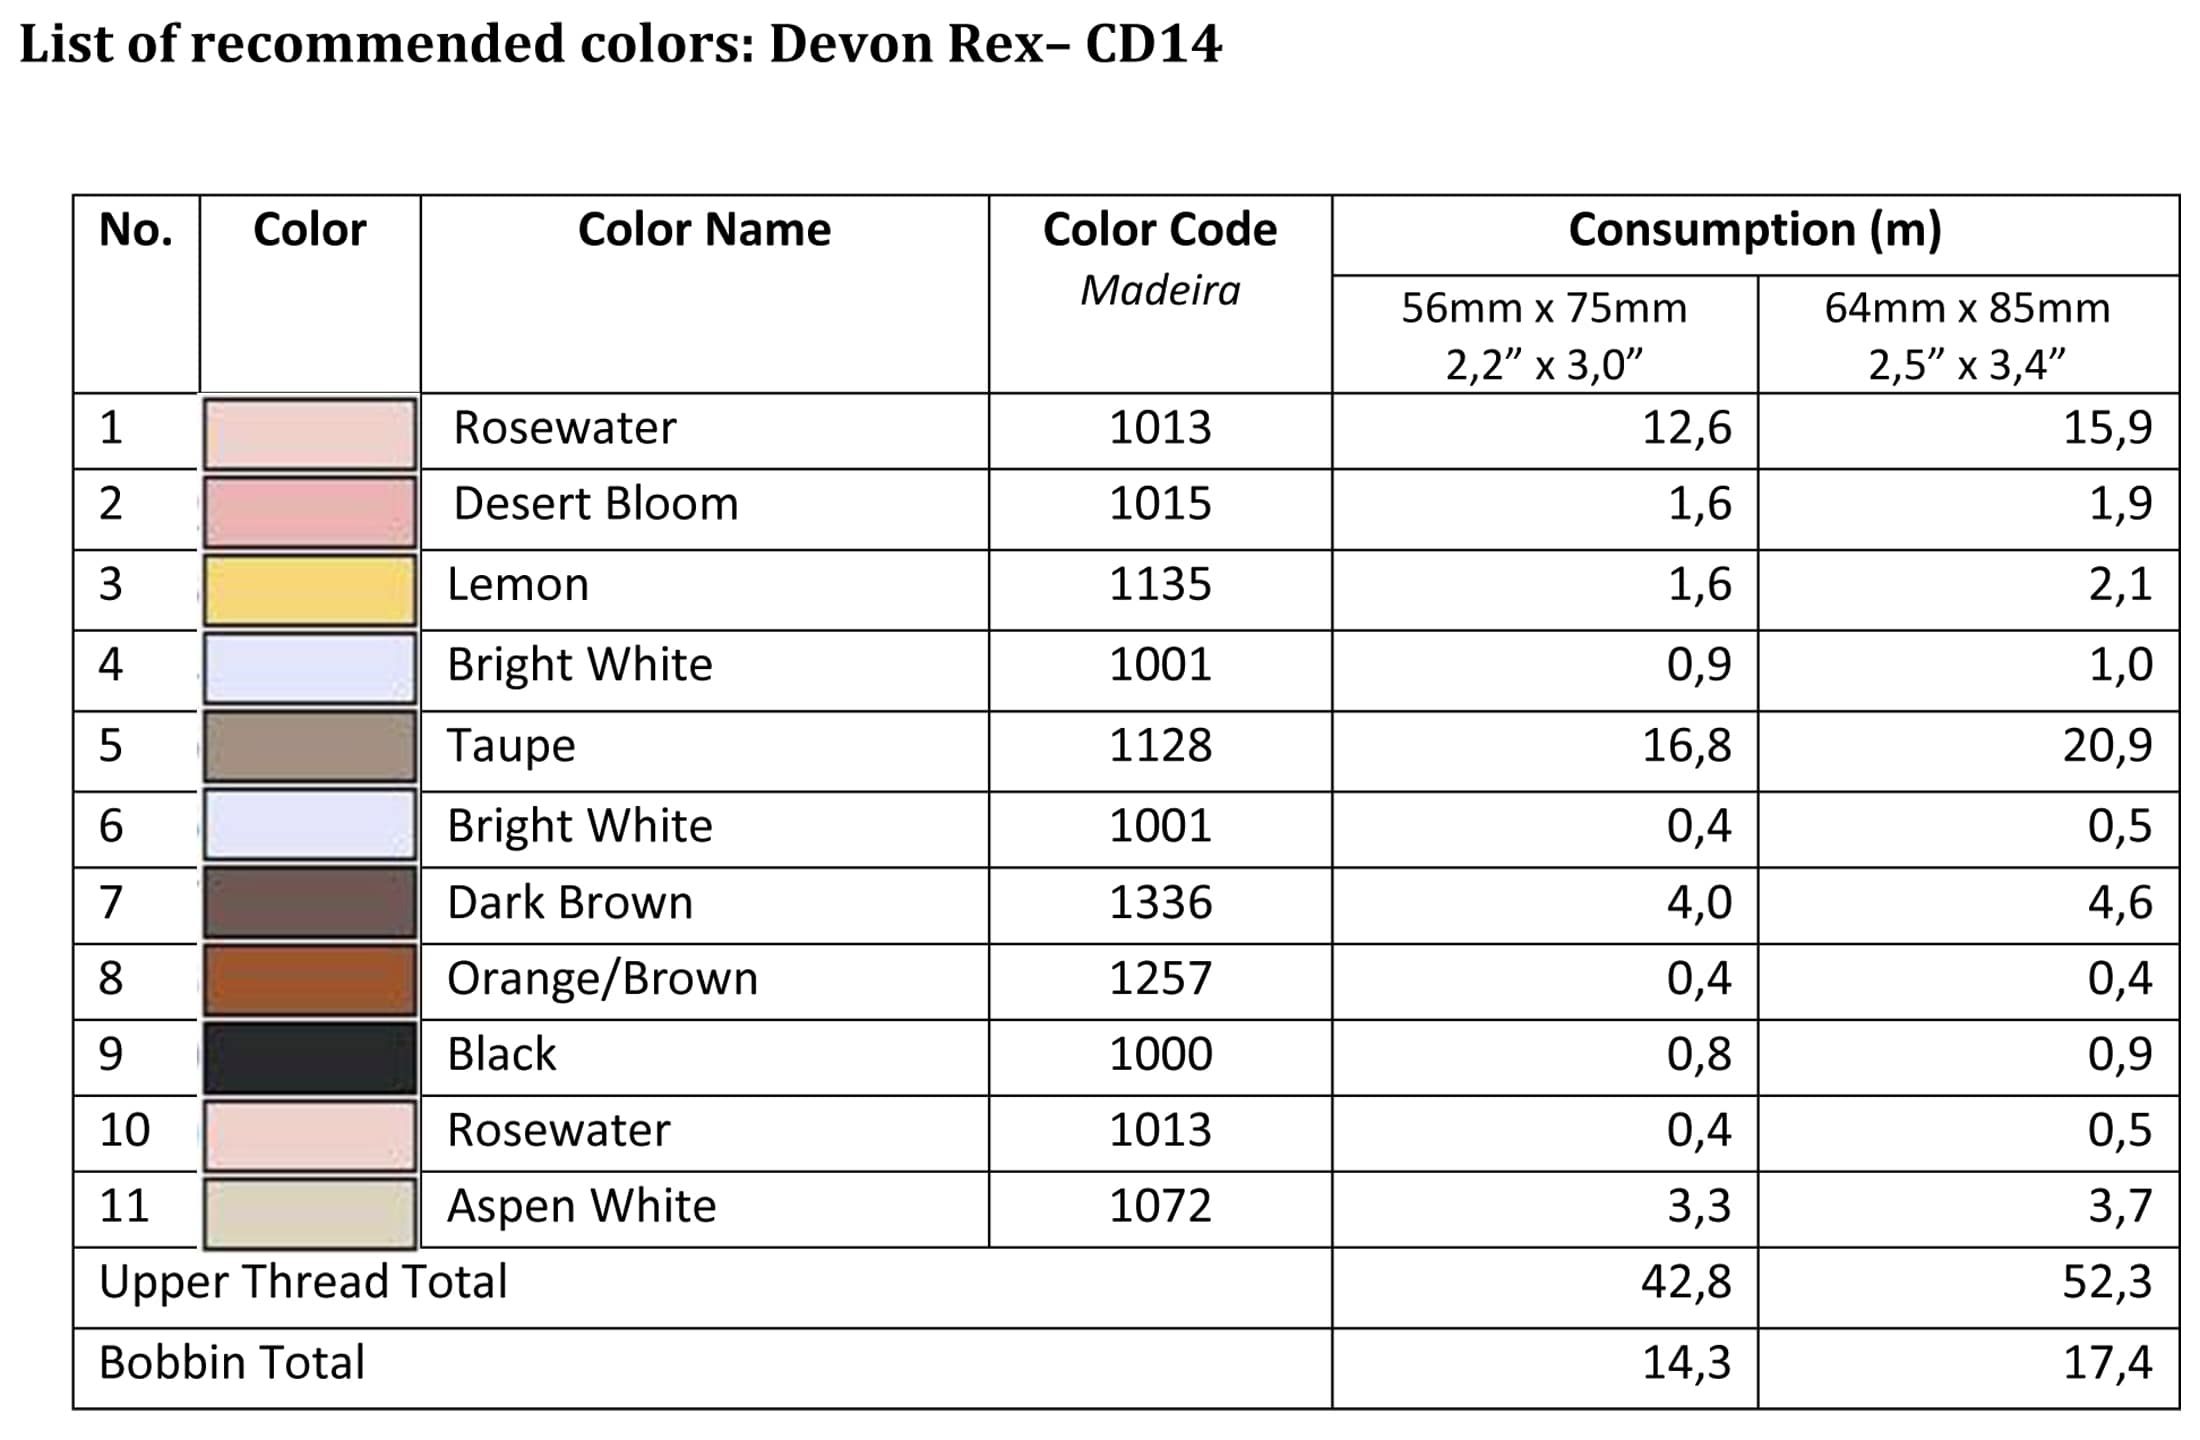 List of recommended colors - CD14